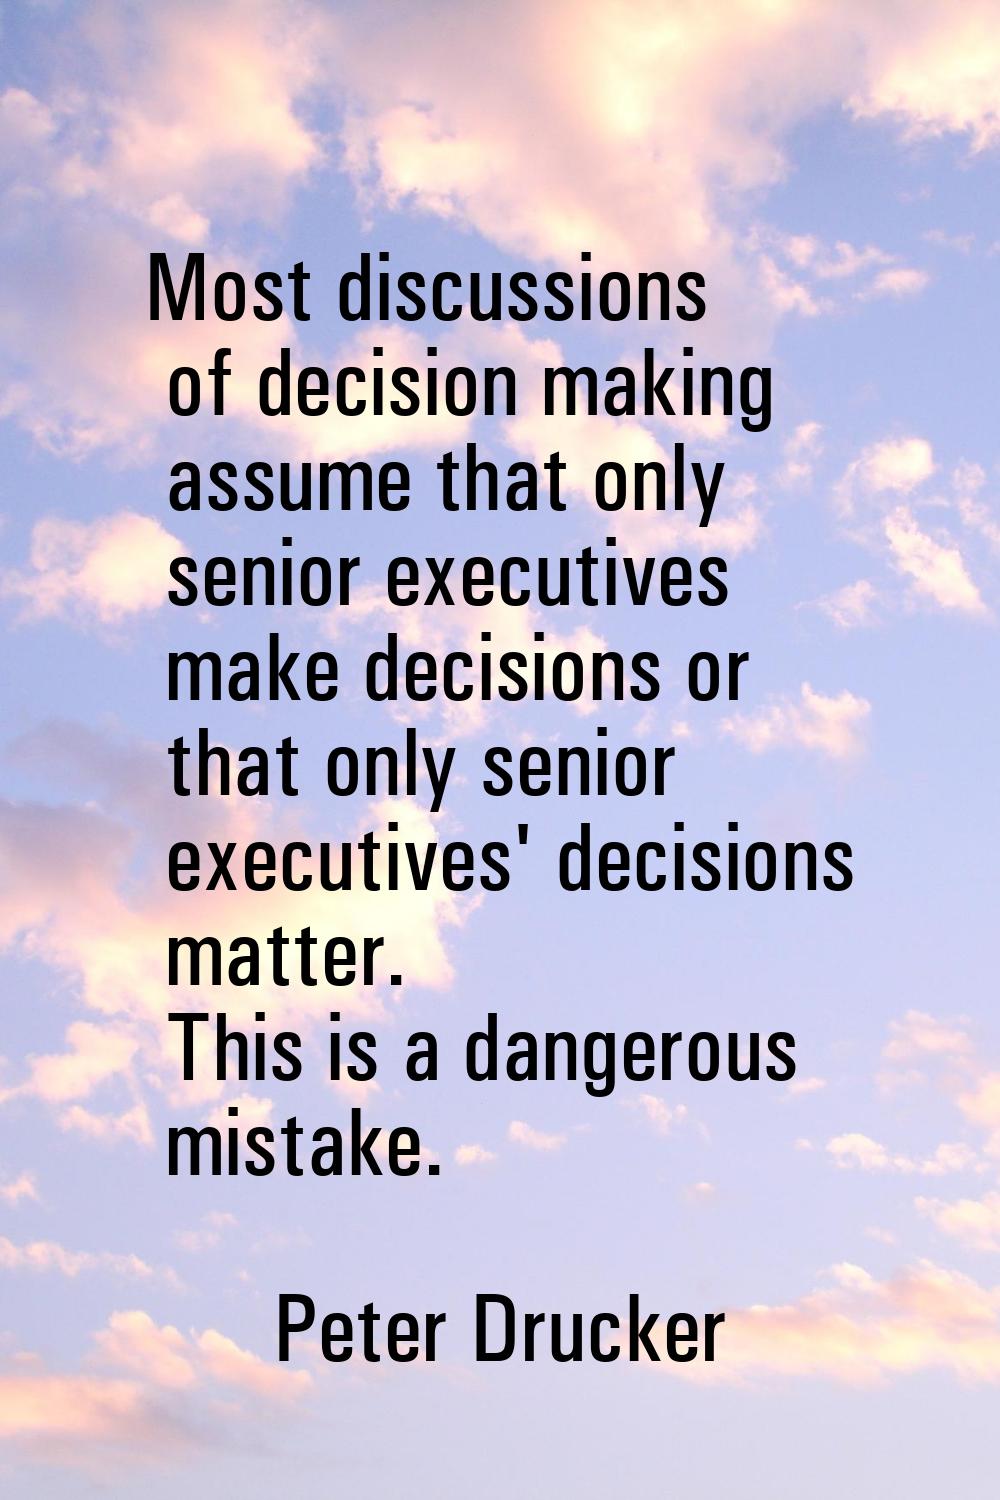 Most discussions of decision making assume that only senior executives make decisions or that only 